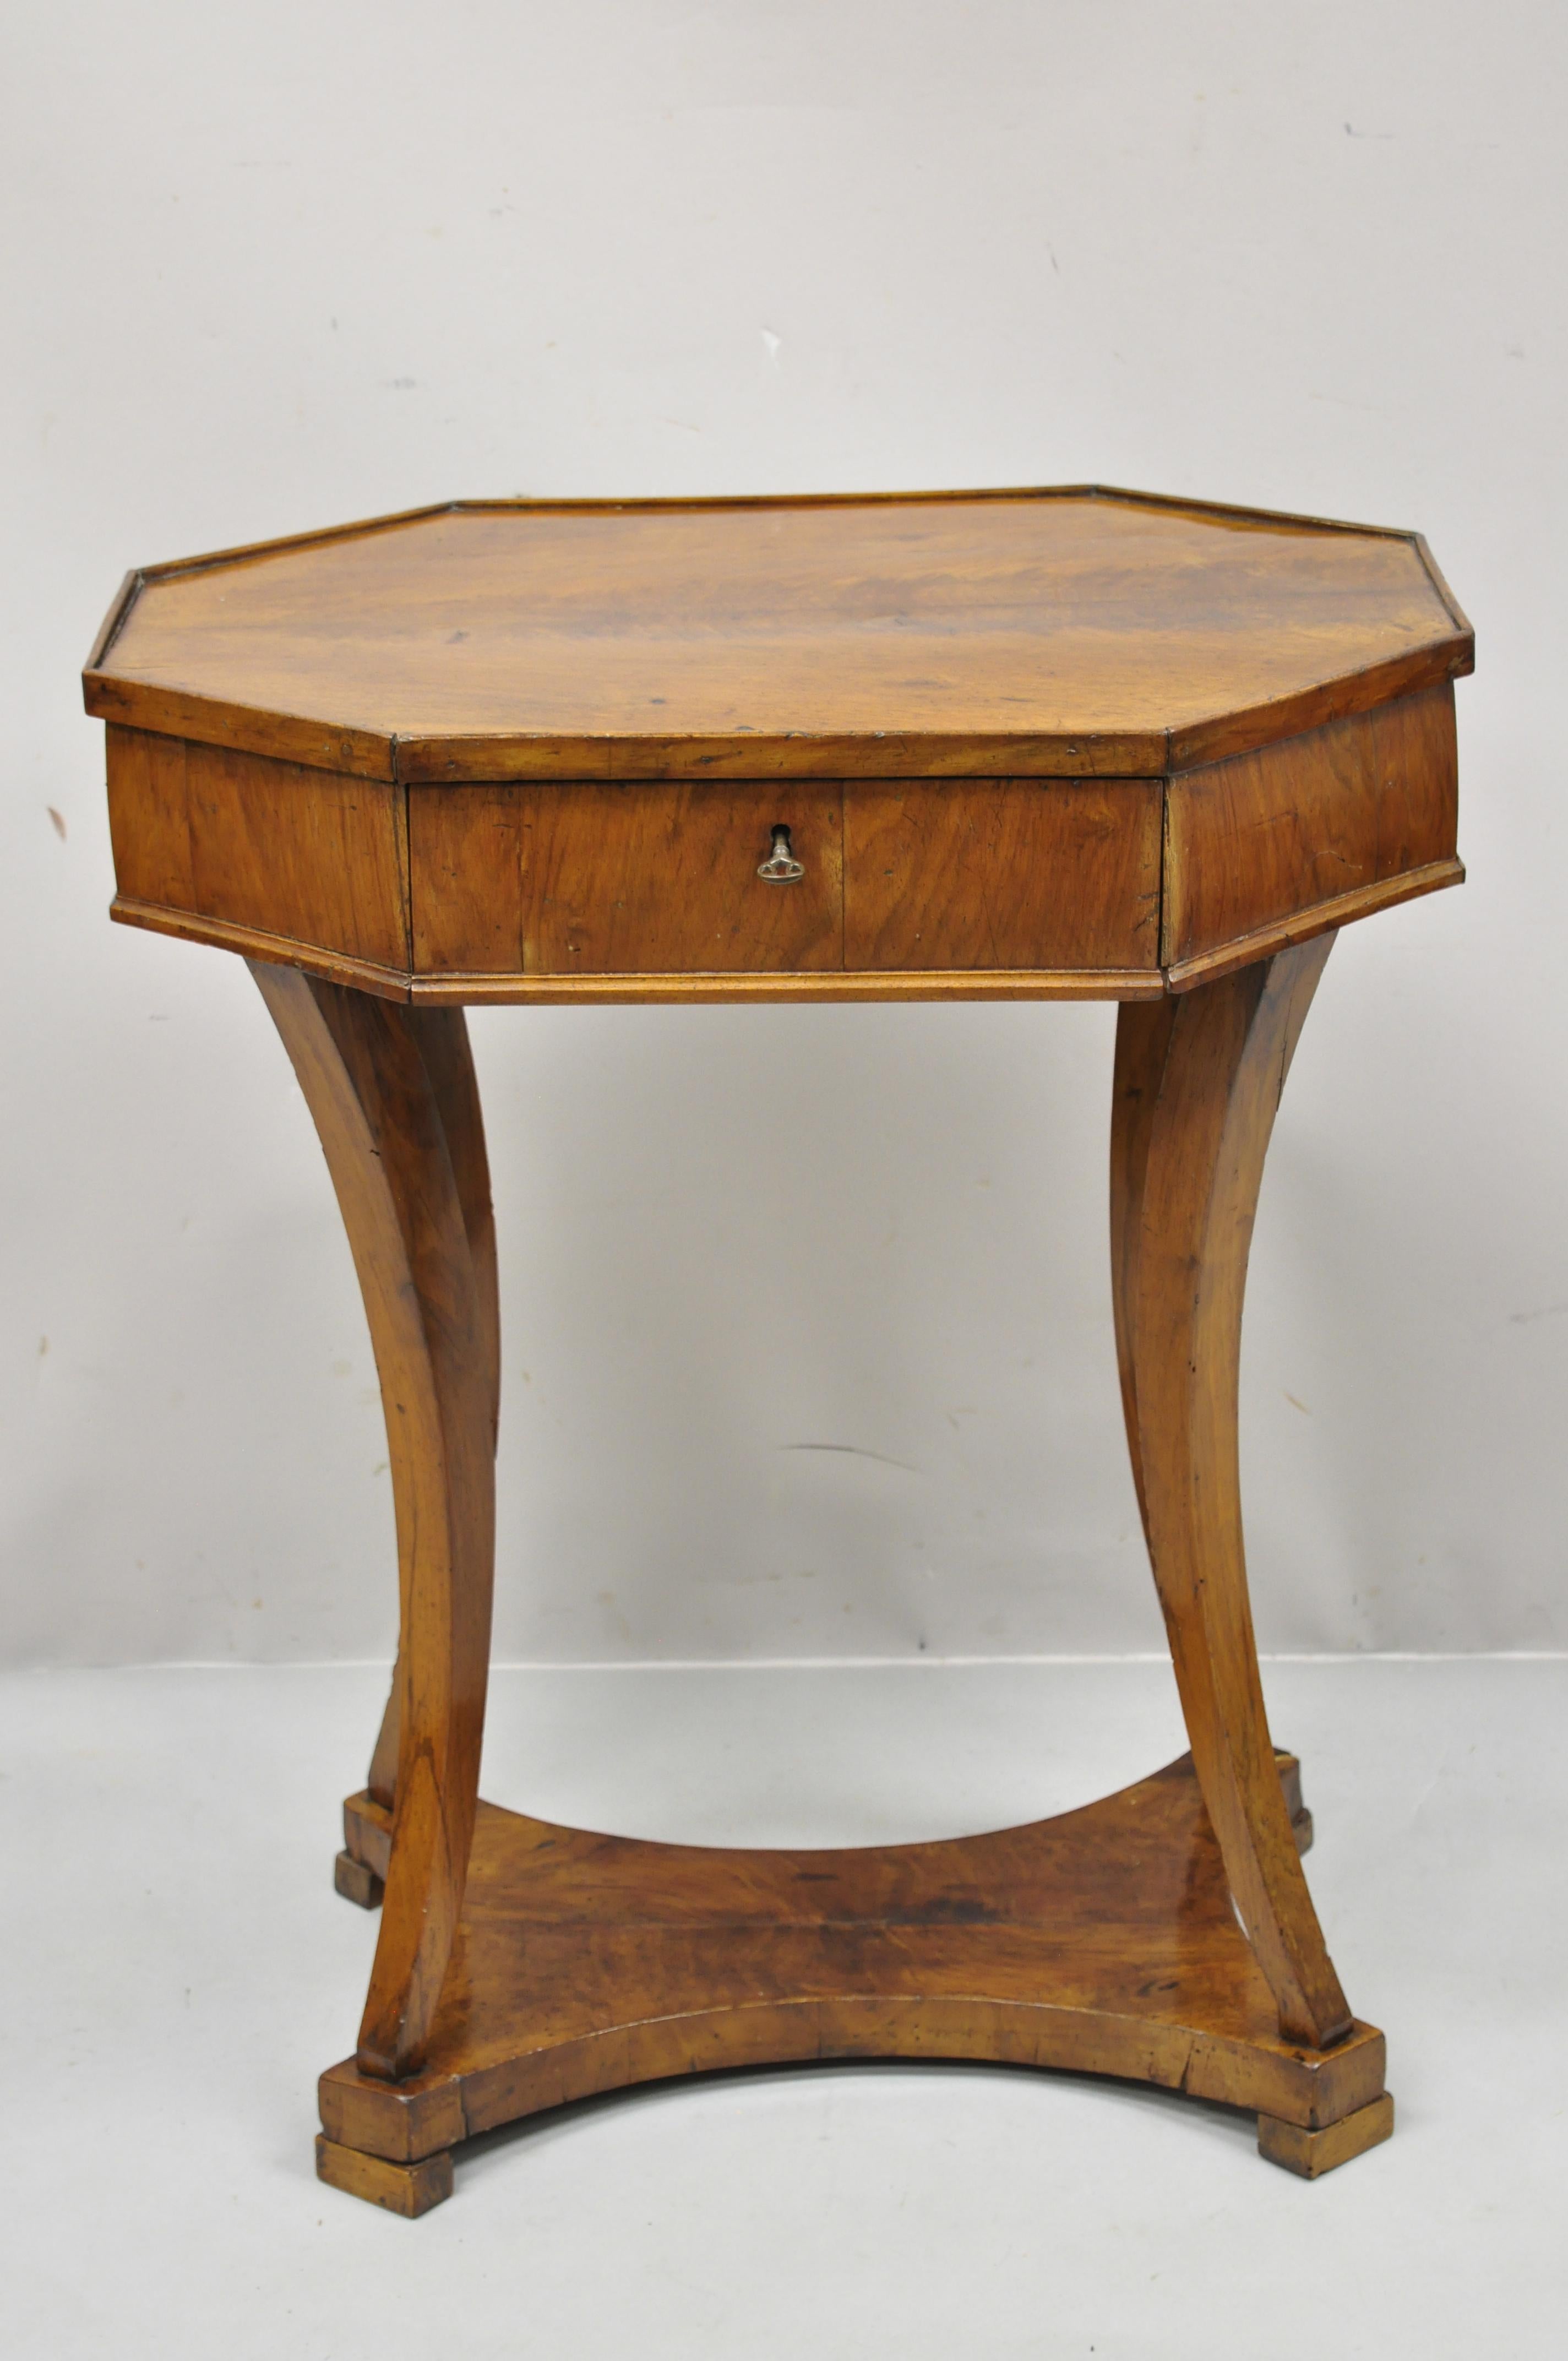 19th century antique cherry wood Italian Biedermeier one drawer accent lamp side table. Item features lower shelf, beautiful wood grain, working lock and key, 1 dovetailed drawer, shapley saber legs, very nice vintage item, quality Italian